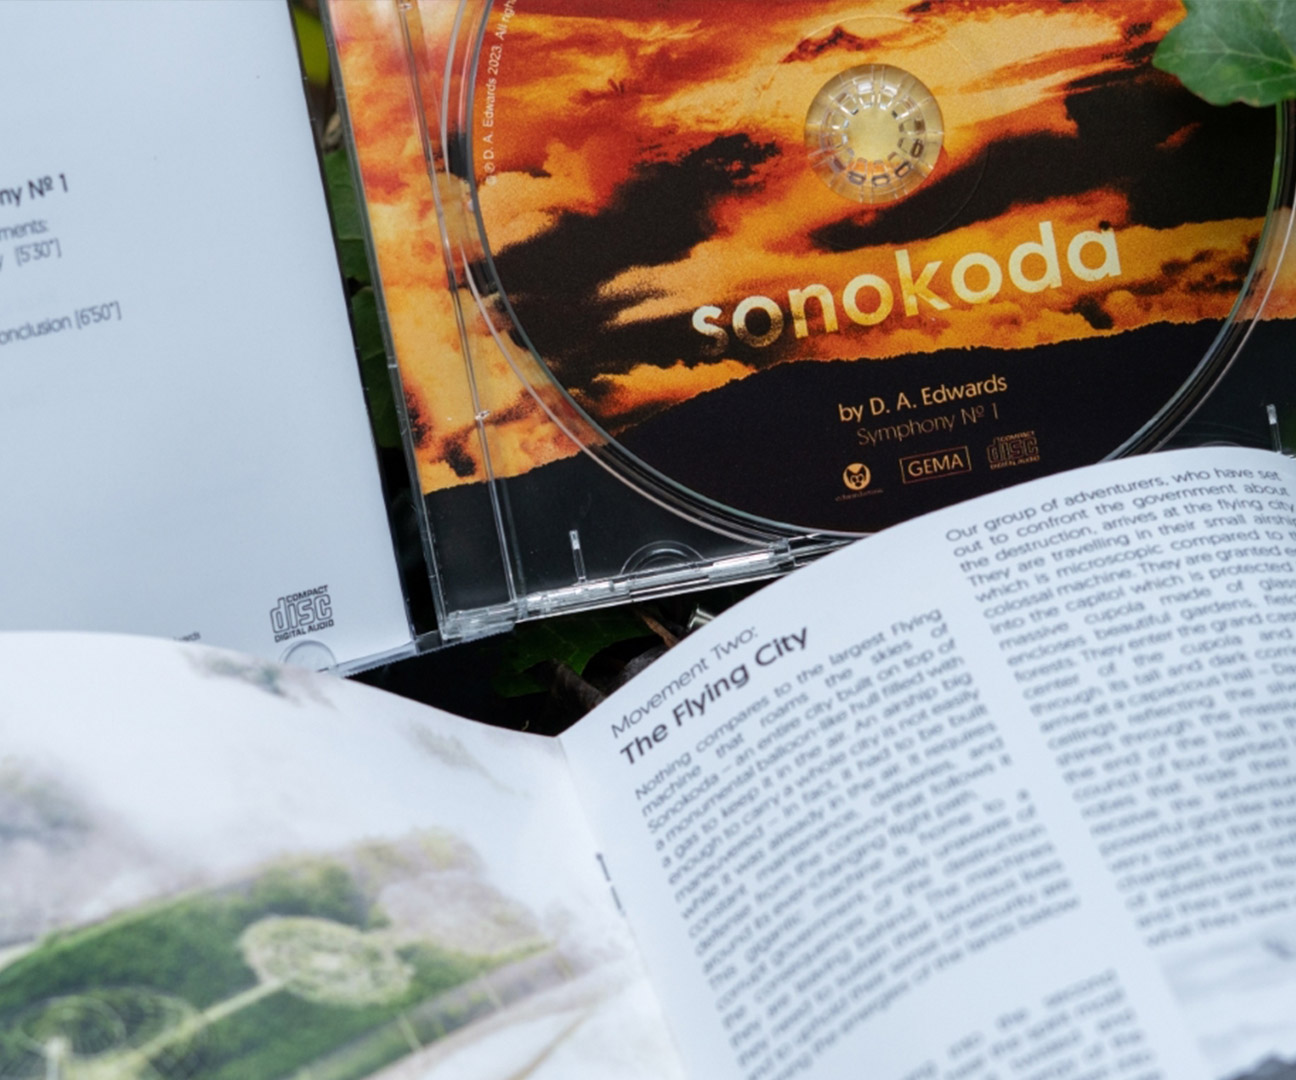 Including a 20-Page booklet detailing the story of Sonokoda